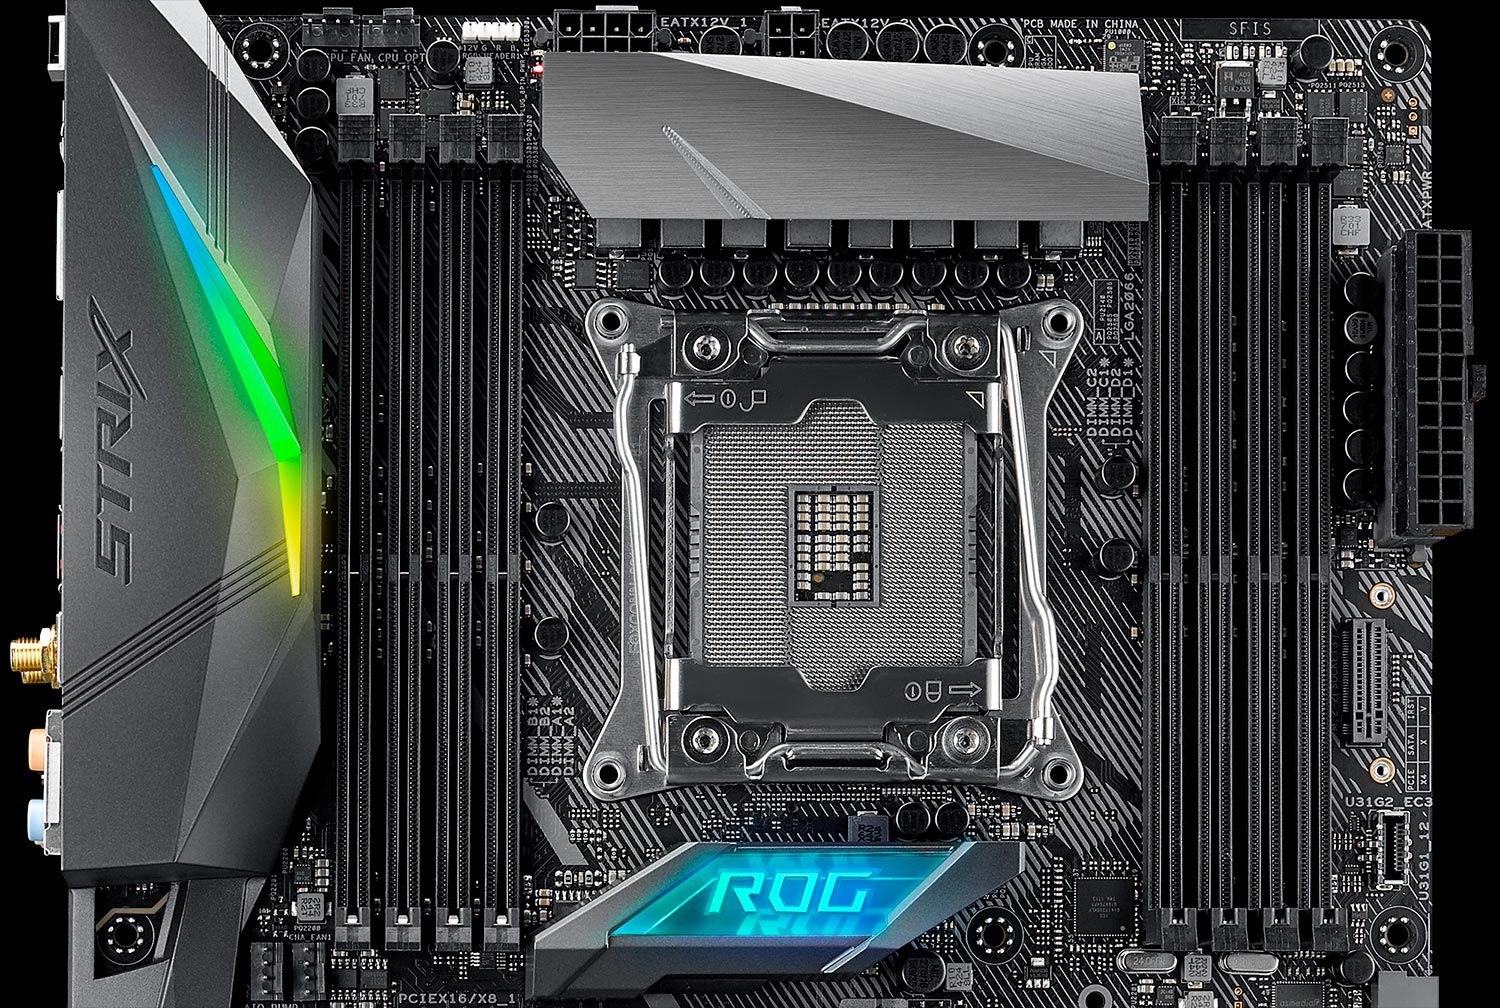 You'll need a new X299 motherboard to run Intel's latest CPUs - The Verge